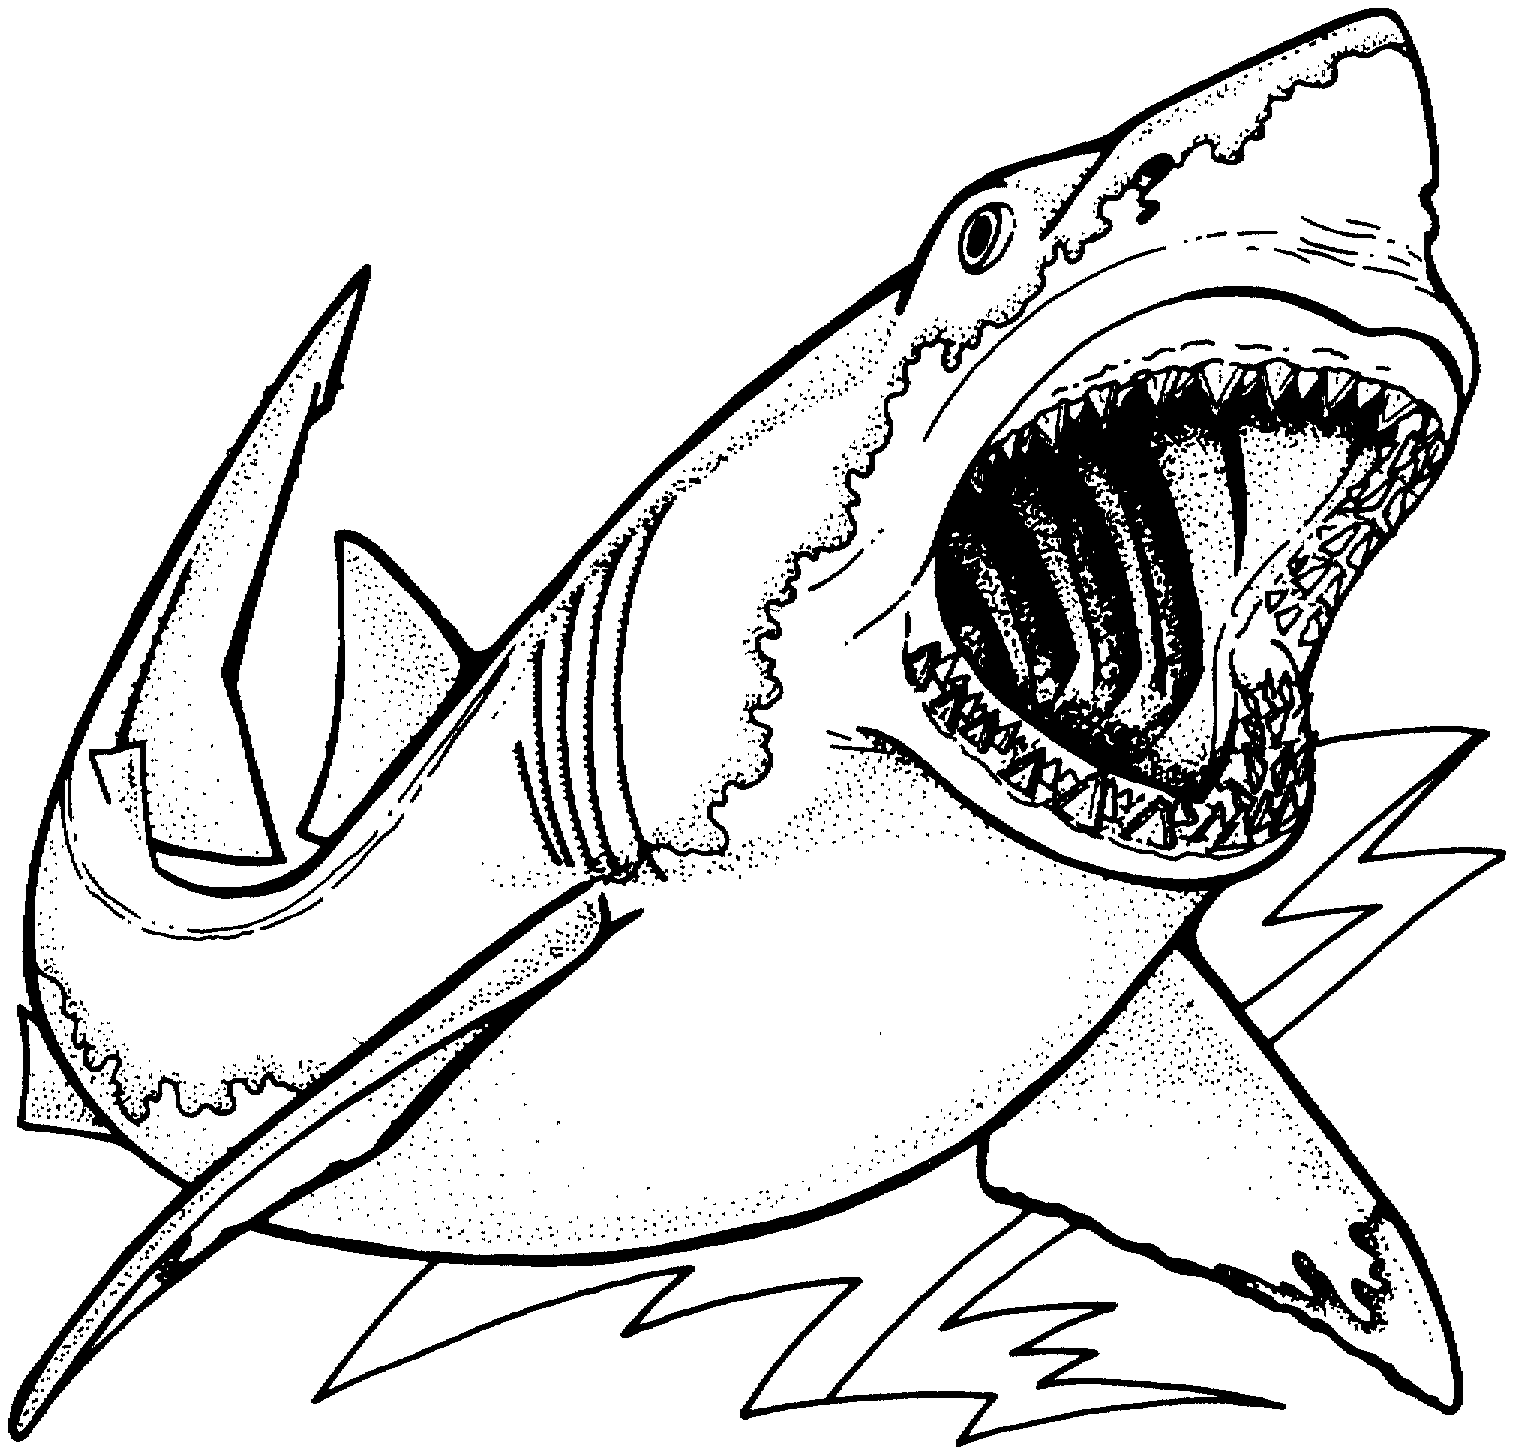 1000+ images about Shark illustrations